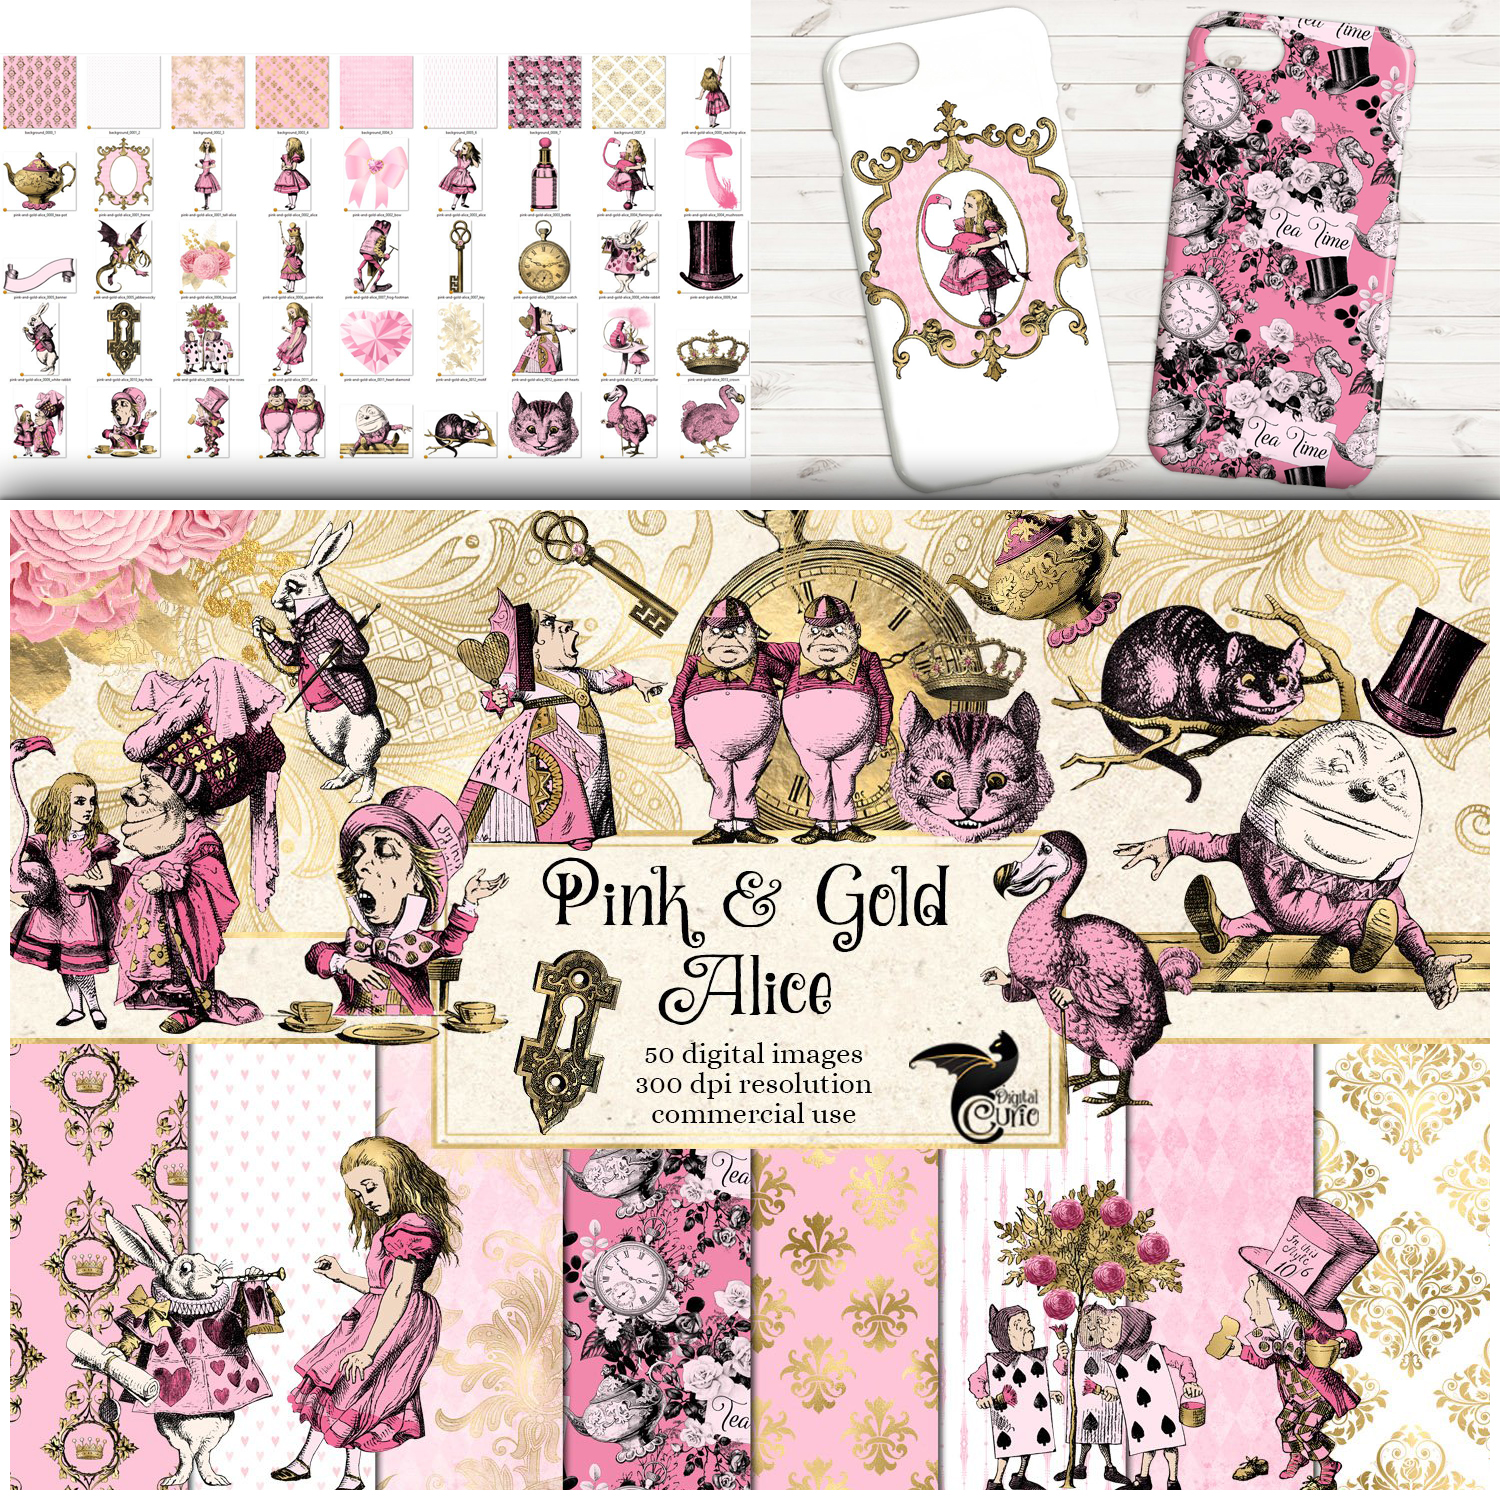 Preview pink and gold alice in wonderland graphics.